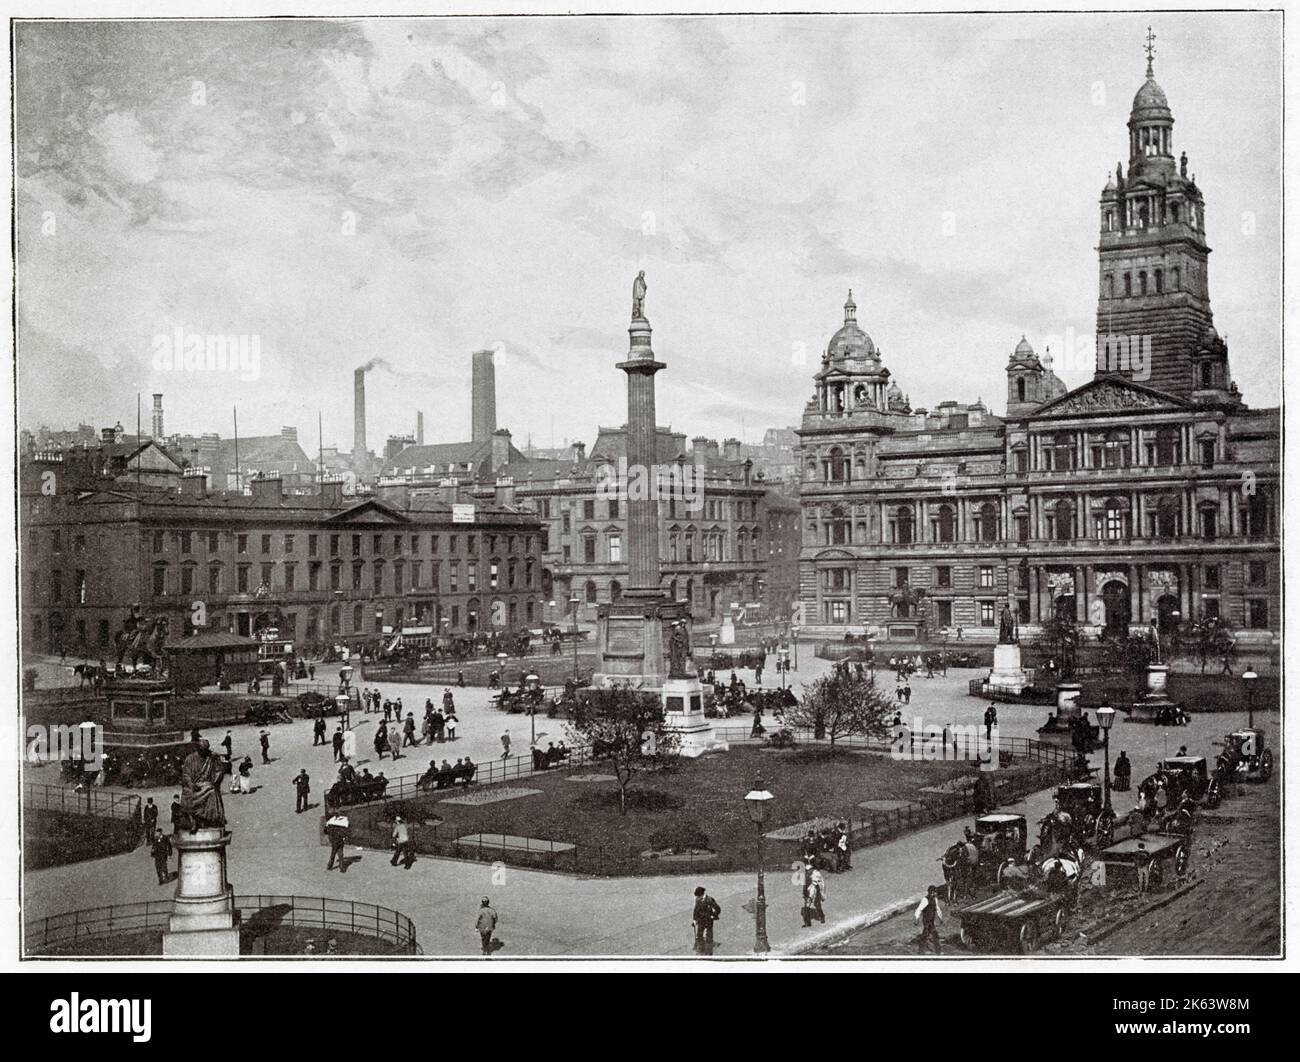 George Square, Glasgow with the City Chambers or  Municipal Buildings that was built i 1889.      Date: 1890s Stock Photo